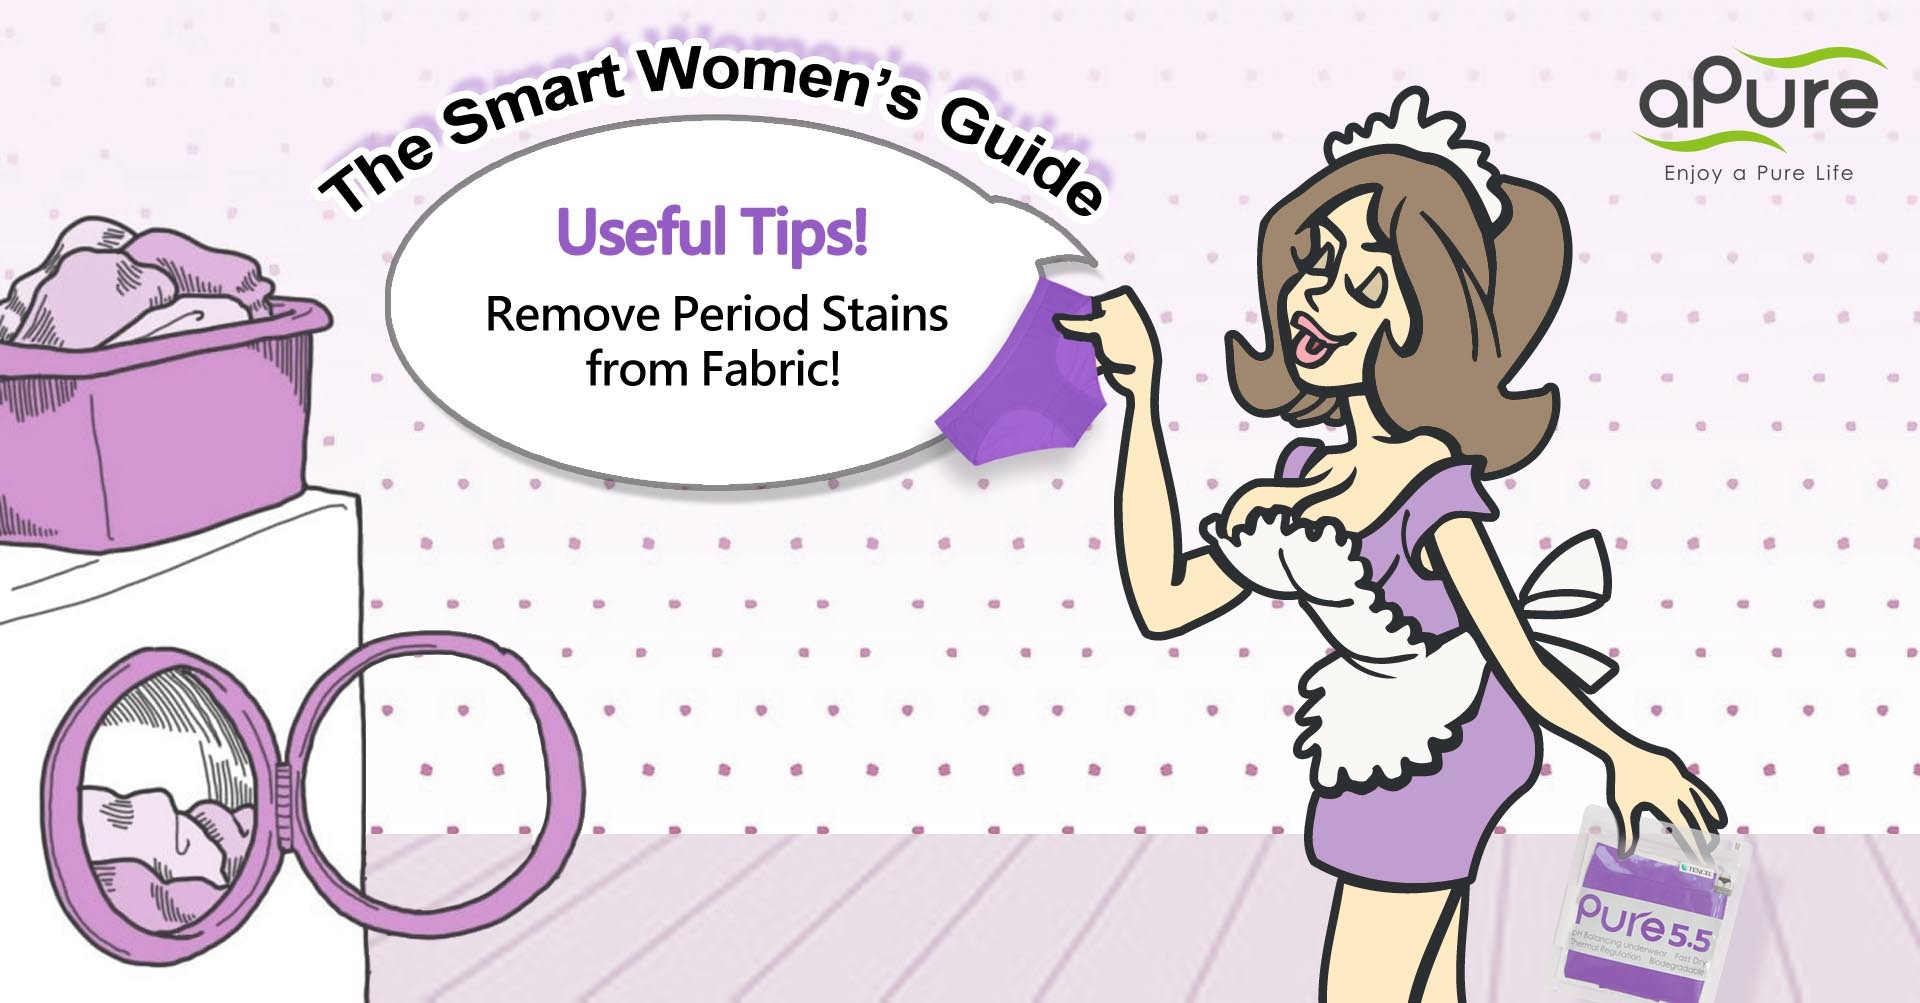 https://mms.businesswire.com/media/20190731005365/en/735868/5/Remove_Period_Stains_from_Frabic.jpg